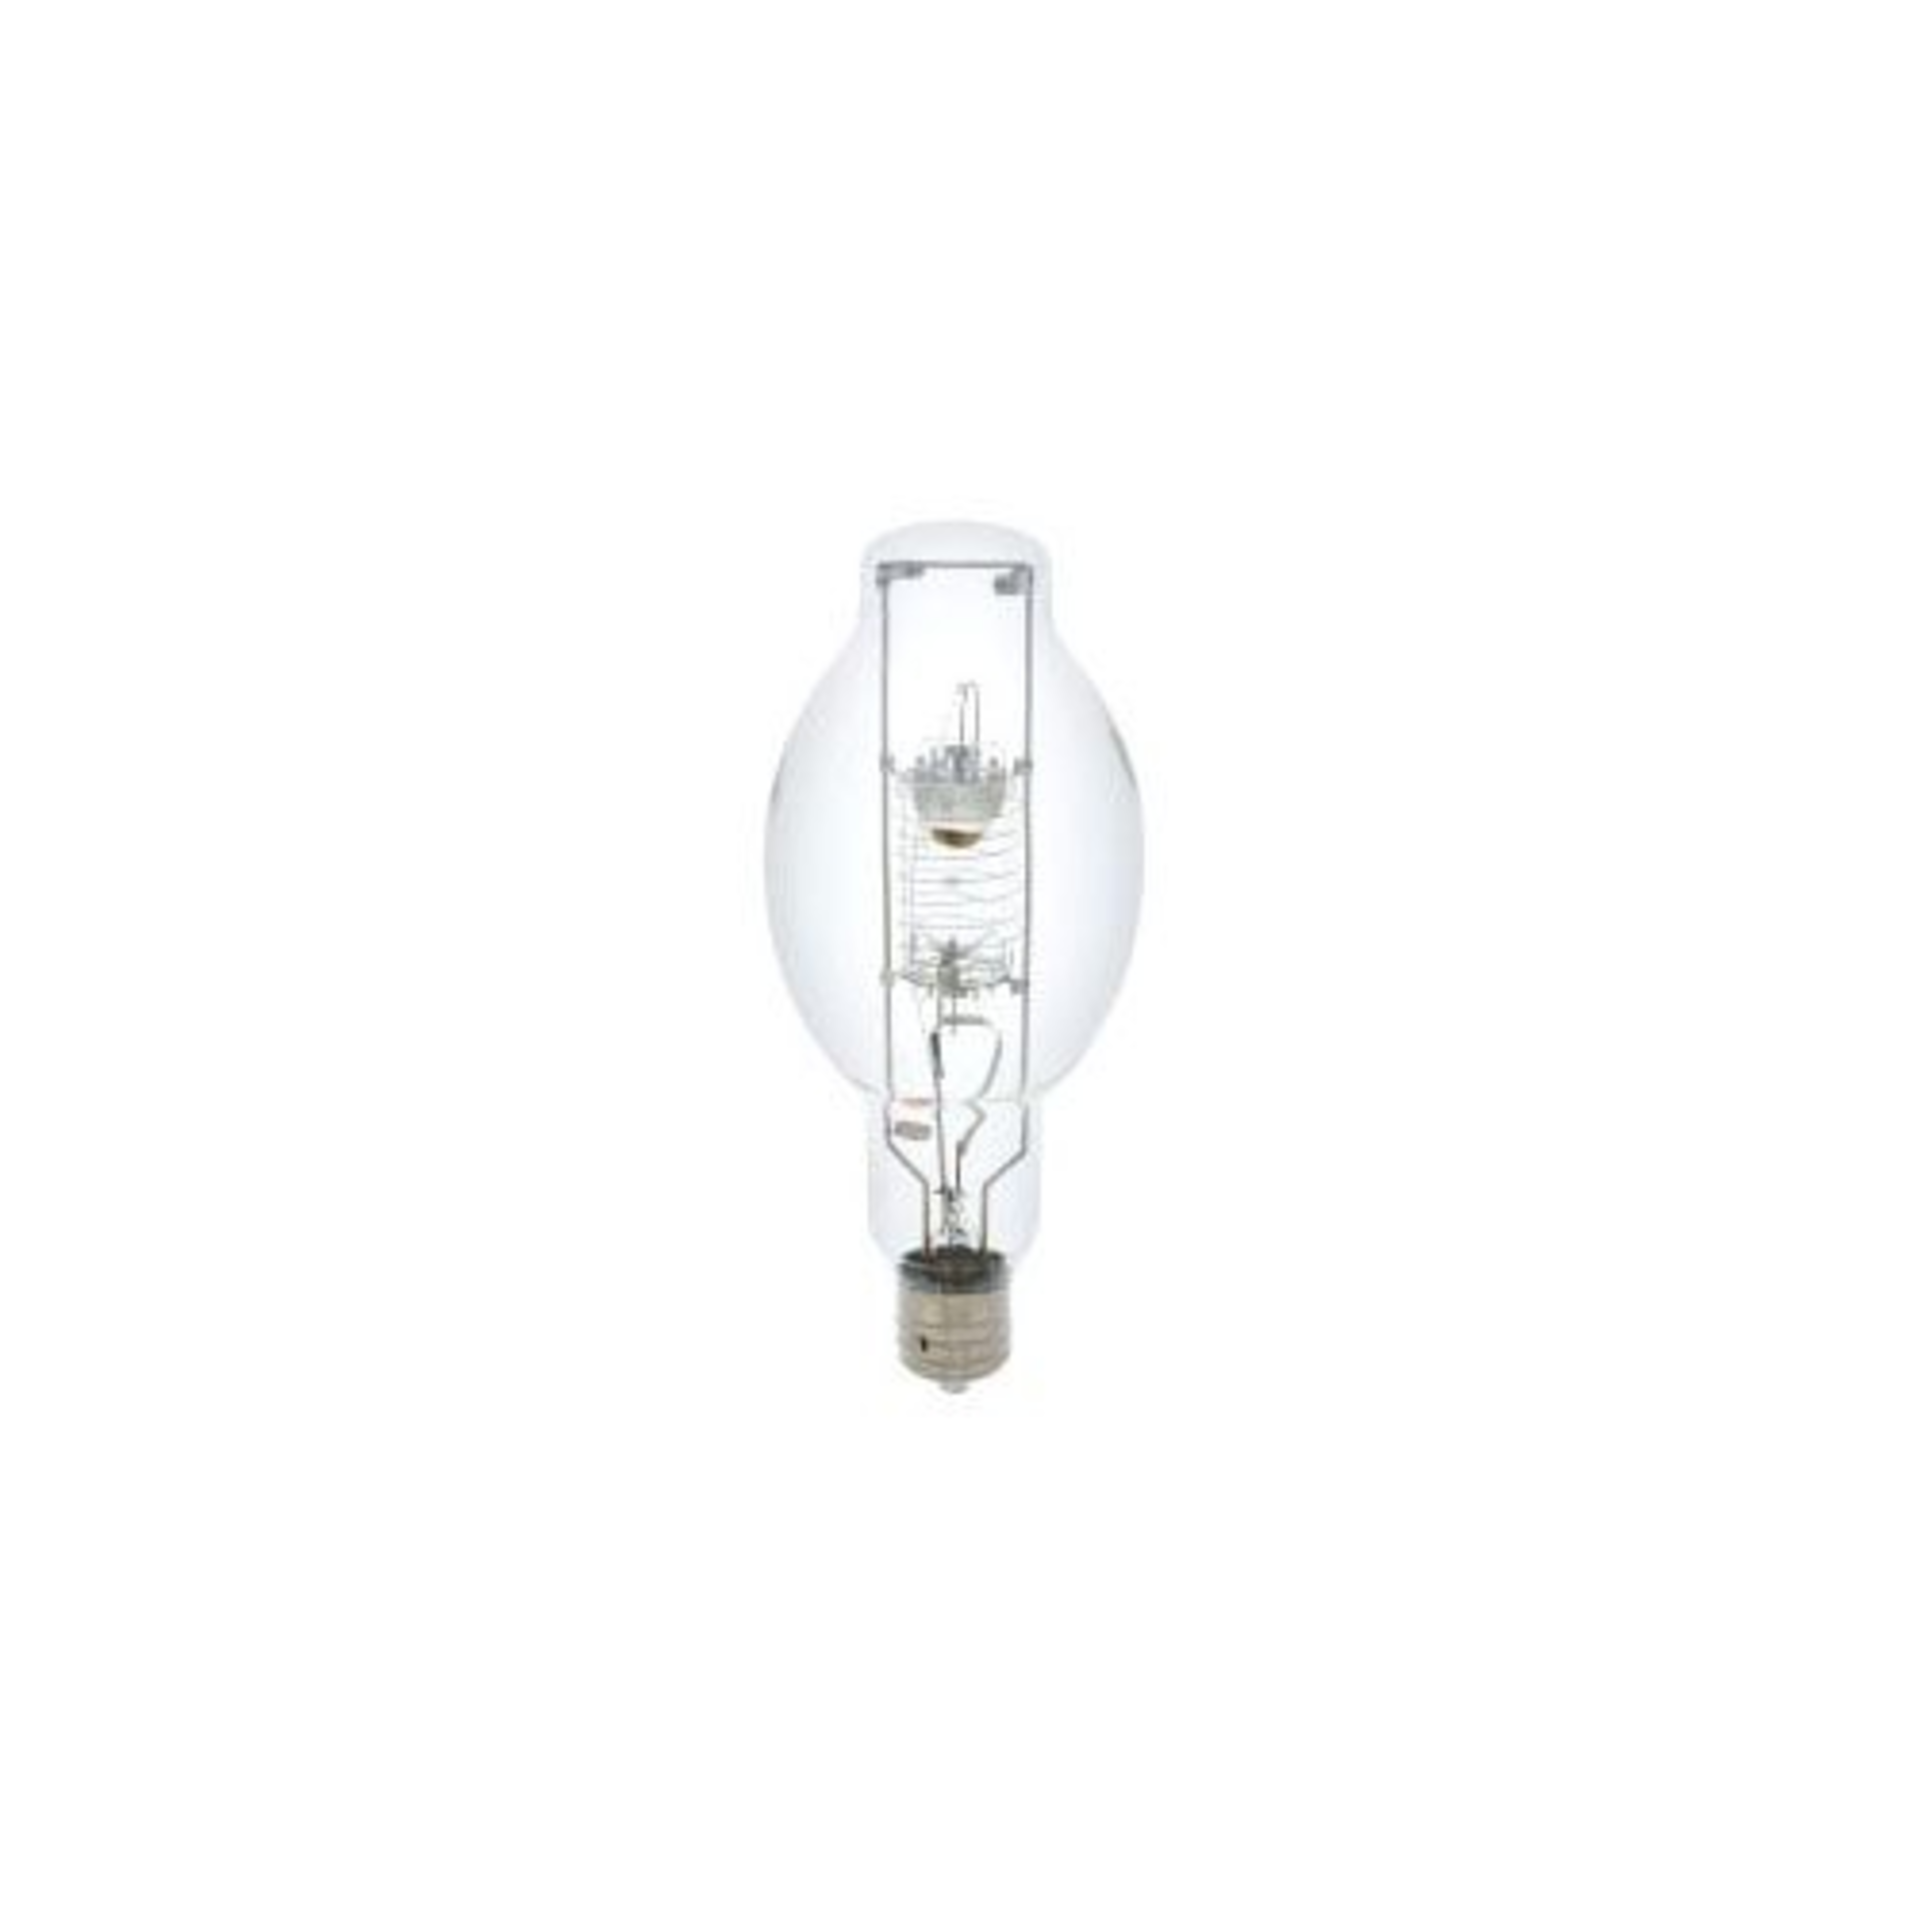 3x Sylvania MSP360/SS/BU-ONLY Miniature and Specialty Bulbs Metal Halide 360W